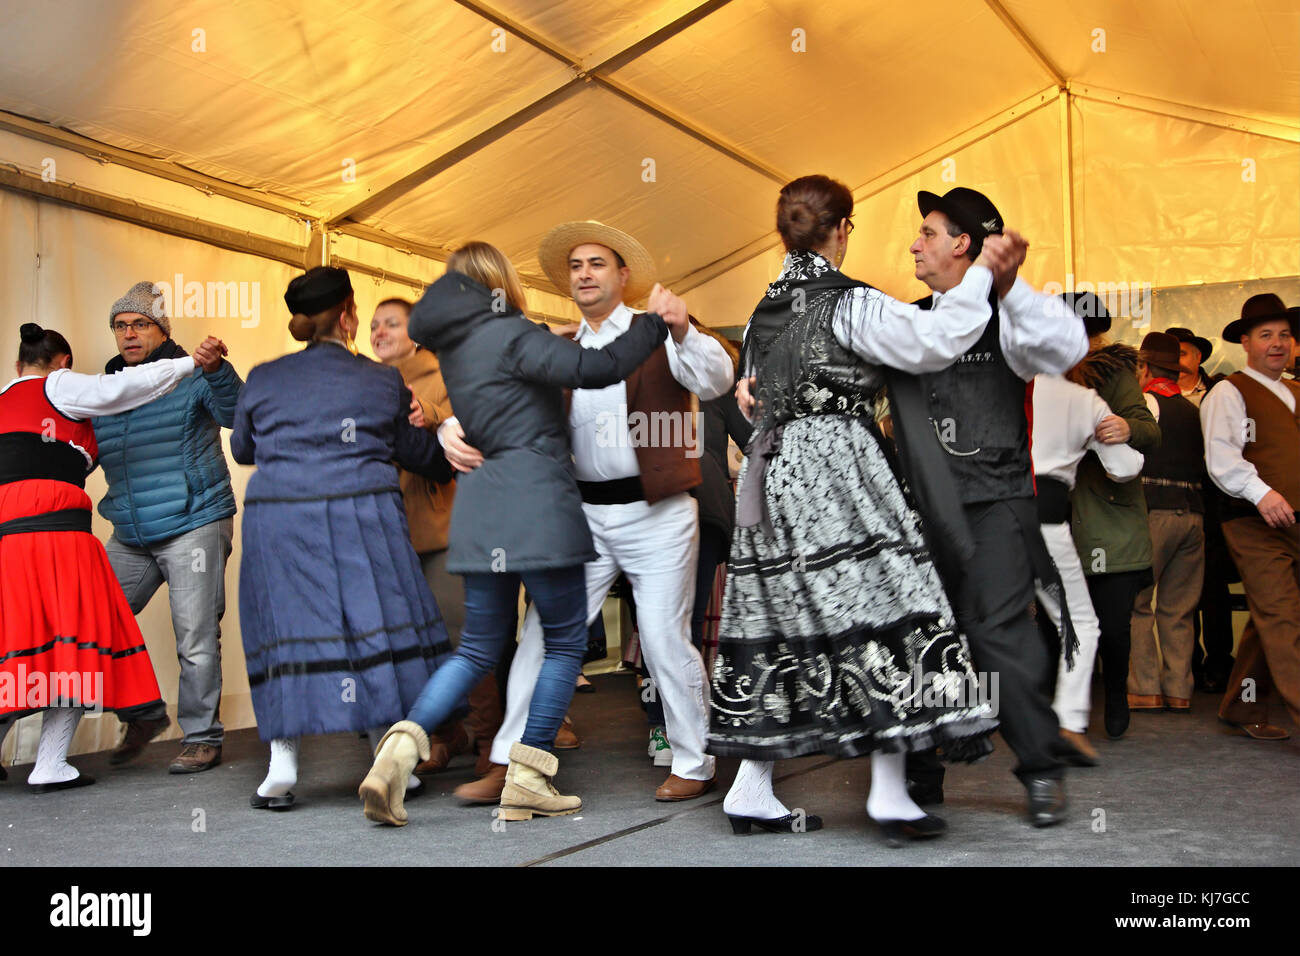 Traditional dancing in a Christmas market at the old town ("Altstadt") of Lucerne, Switzerland. Stock Photo